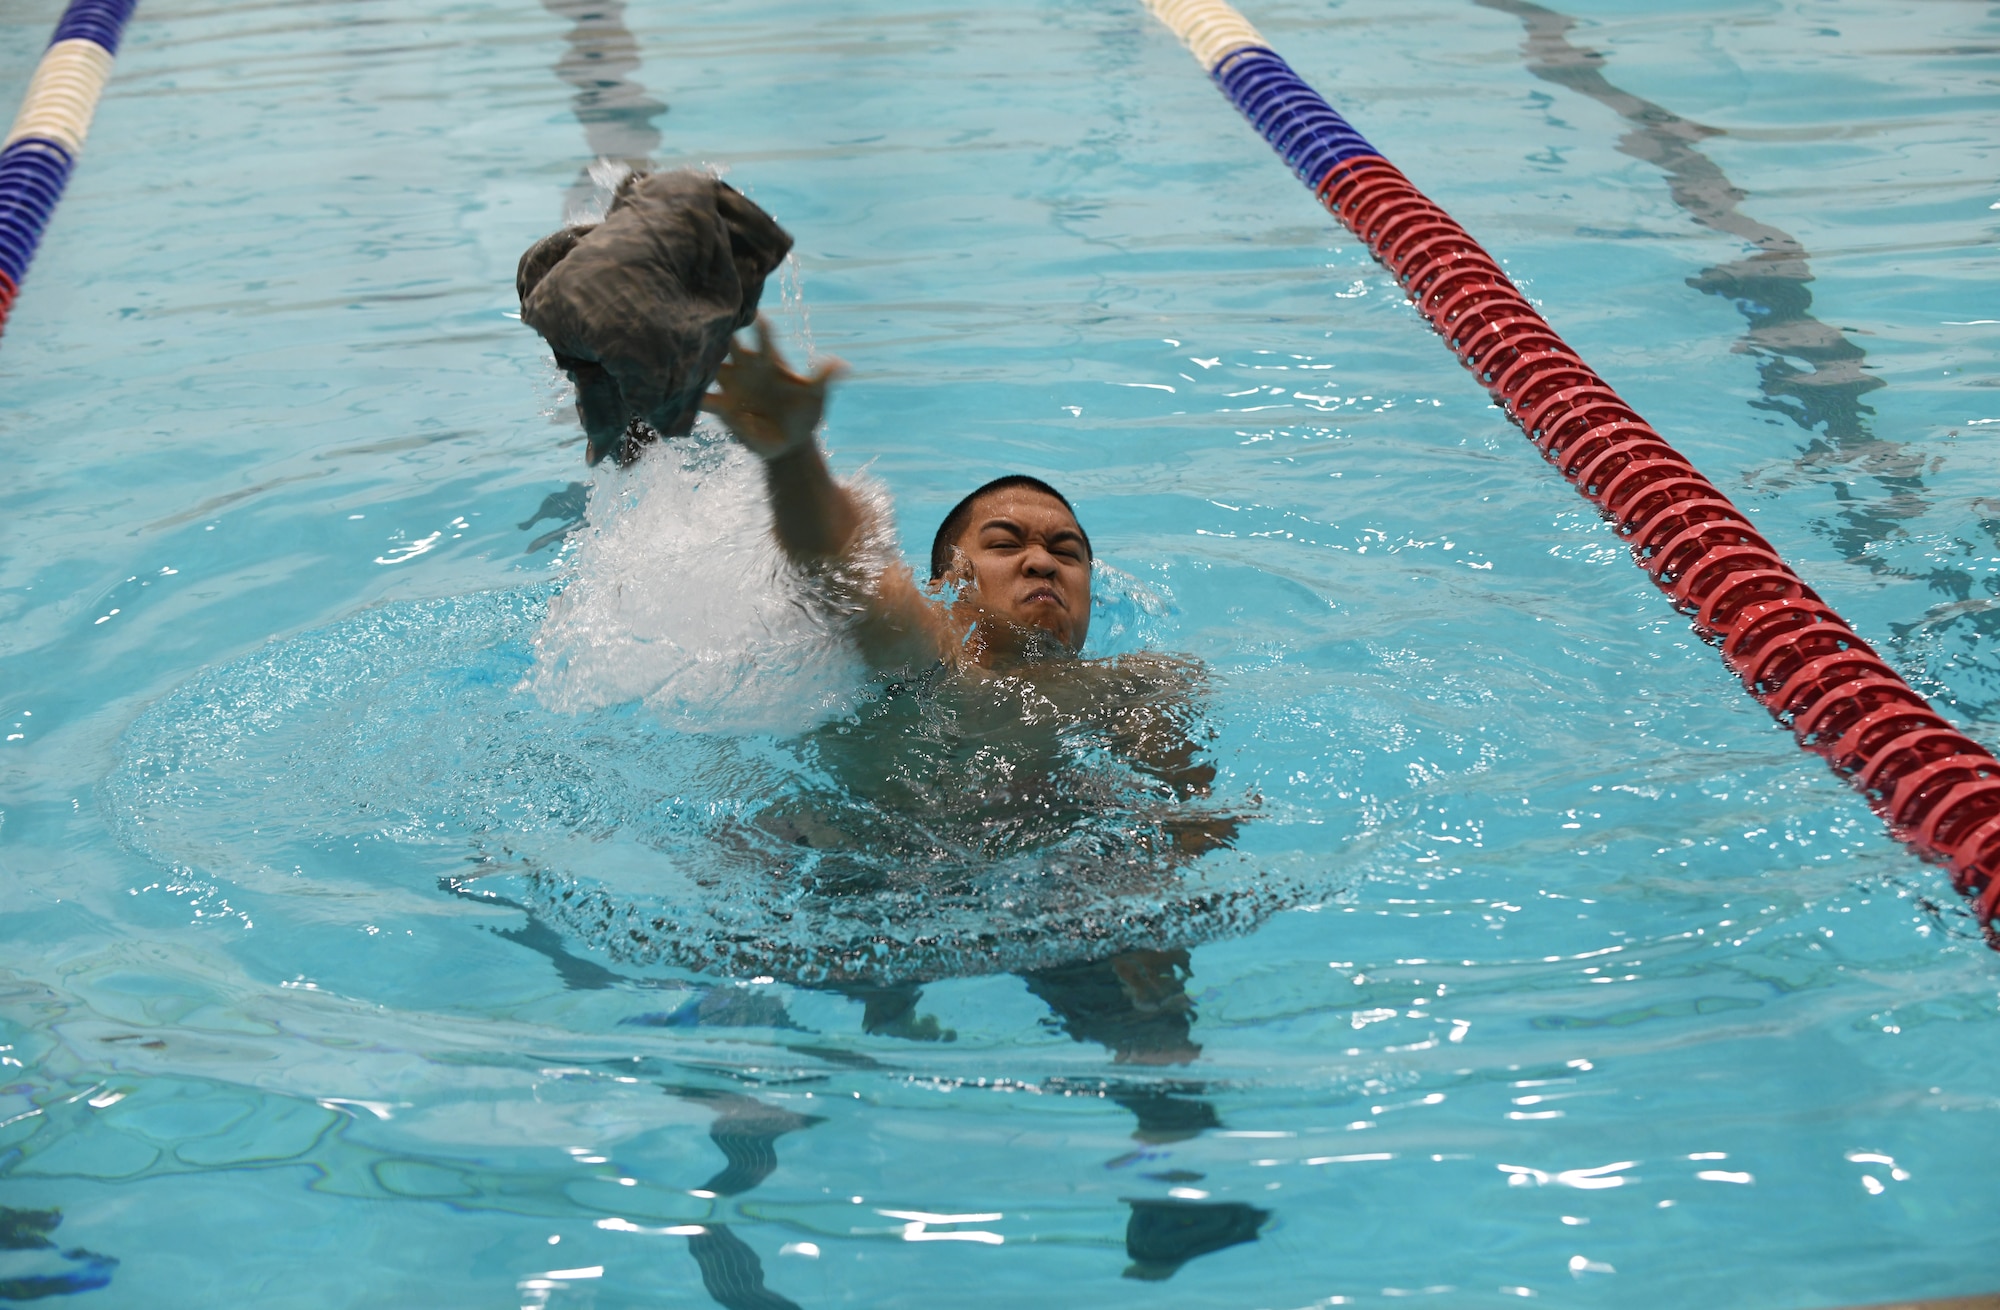 Staff Sgt. Jefferey Sales, a 28th Security Forces Squadron combat arms instructor, throws his top onto the pool deck at the Bellamy Fitness Center on Ellsworth Air Force Base, S.D., Sept. 20, 2019. Participants of the German Armed Forces Proficiency Test swam 100 meters in uniform, then undressed while treading water. The event was completed once participants successfully landed their uniforms onto the pool deck. (U.S. Air Force photo by Airman 1st Class Christina Bennett)